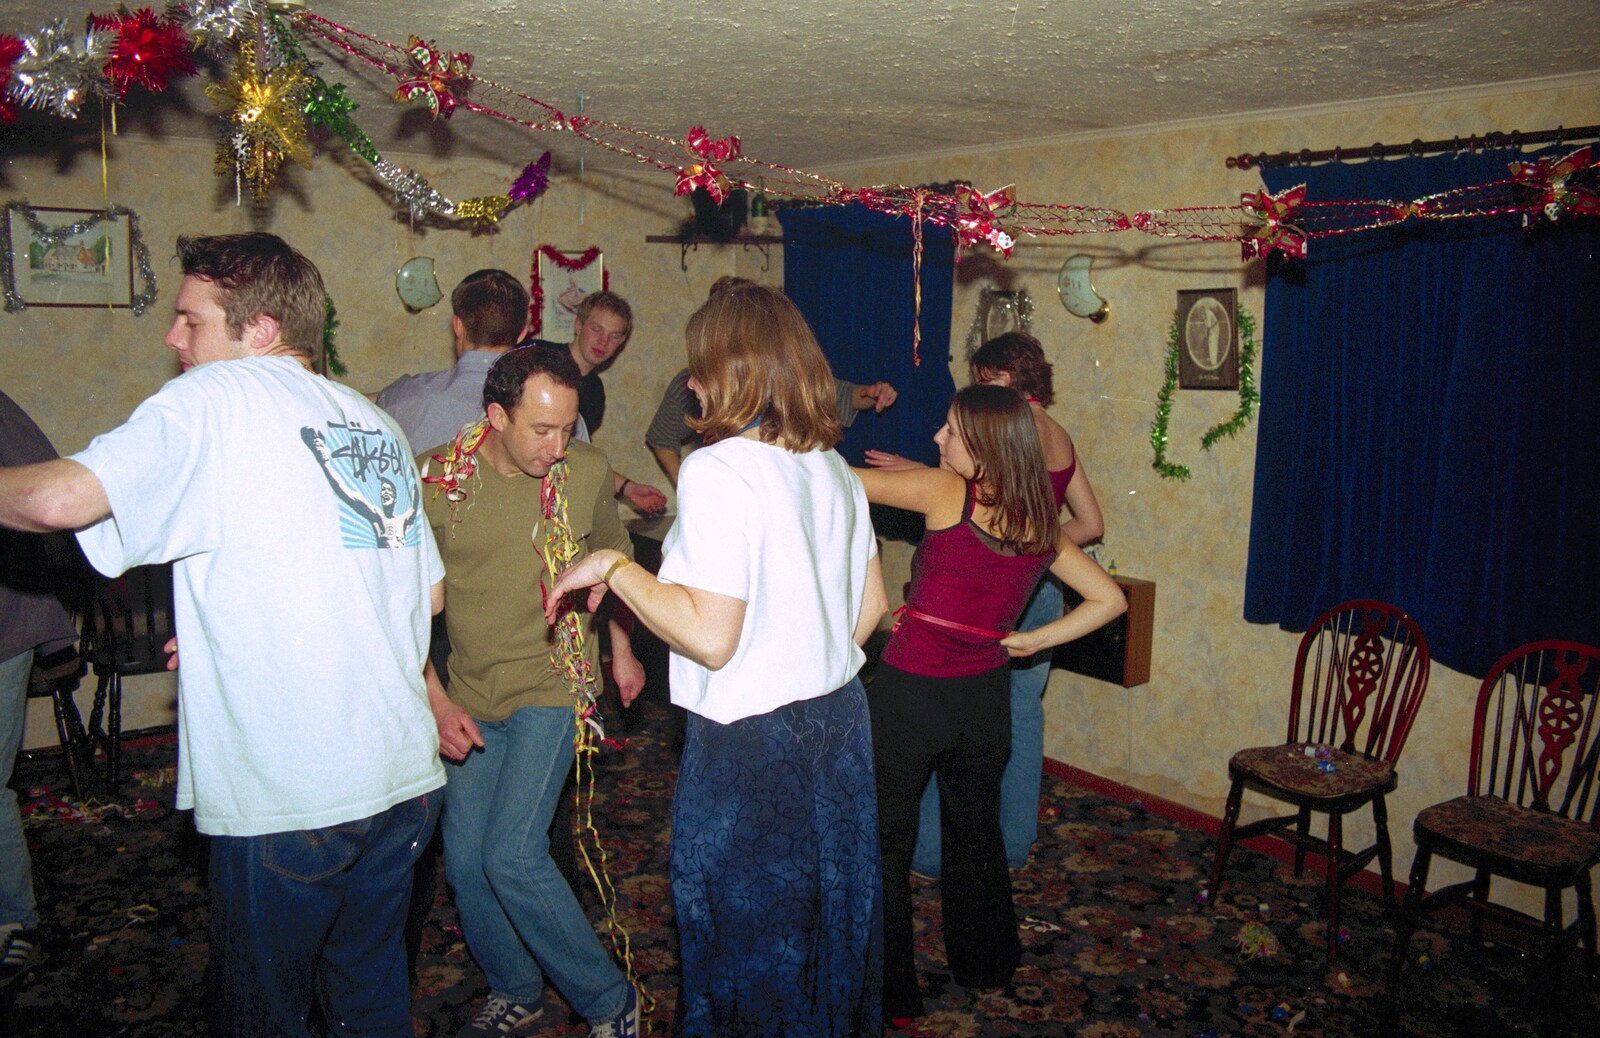 More funky moves from New Year's Eve at The Swan Inn, Brome, Suffolk - 31st December 1999